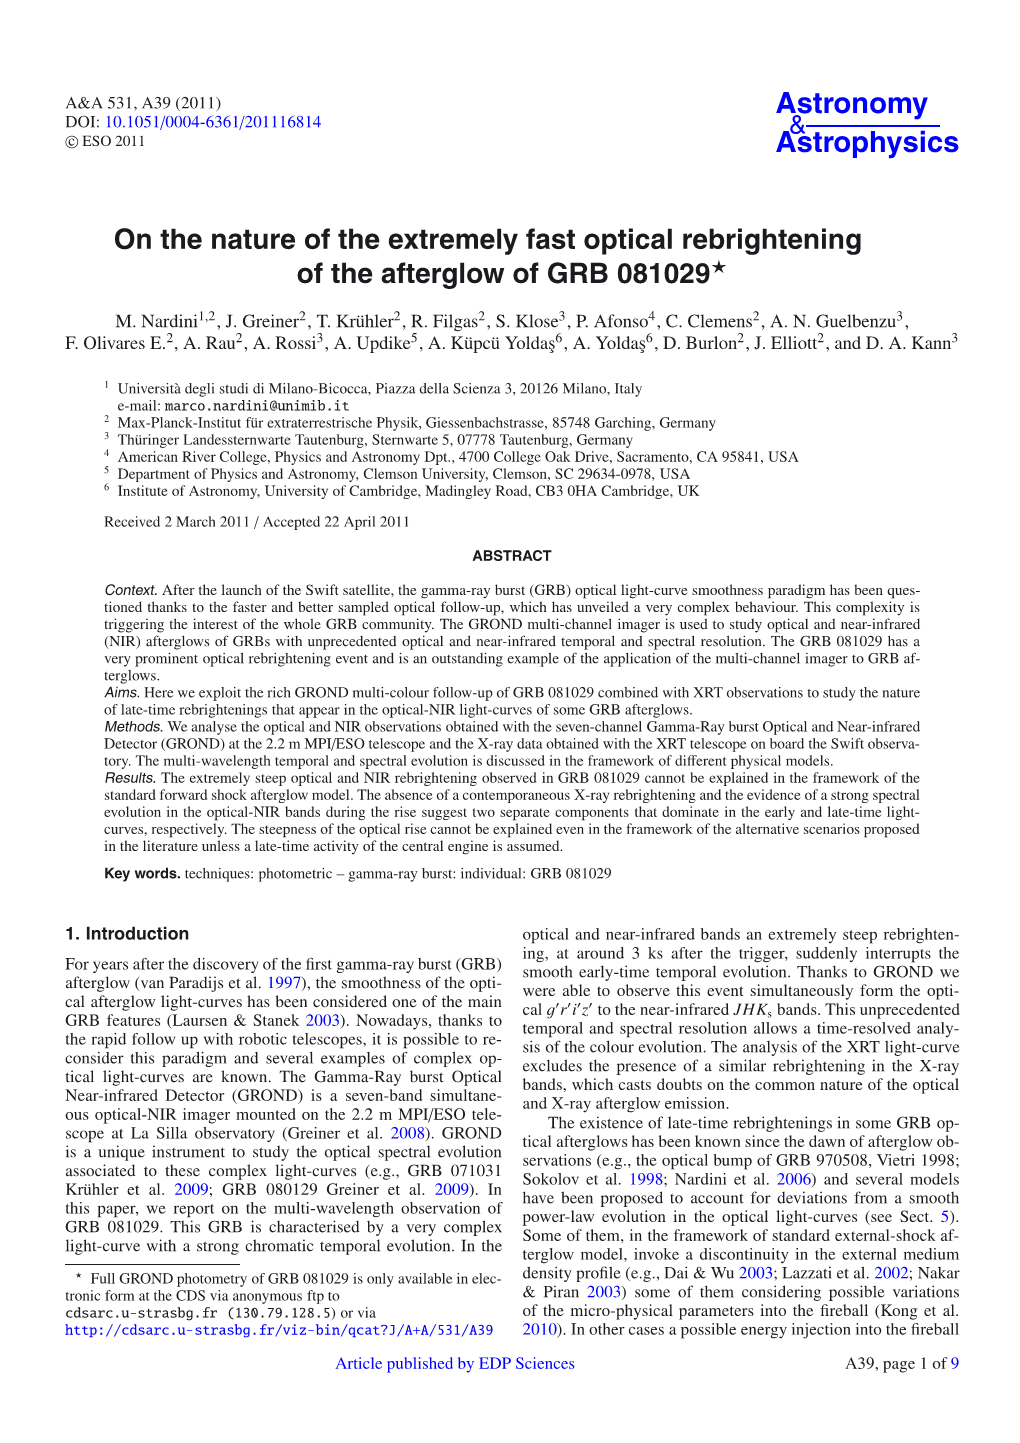 On the Nature of the Extremely Fast Optical Rebrightening of the Afterglow of GRB 081029